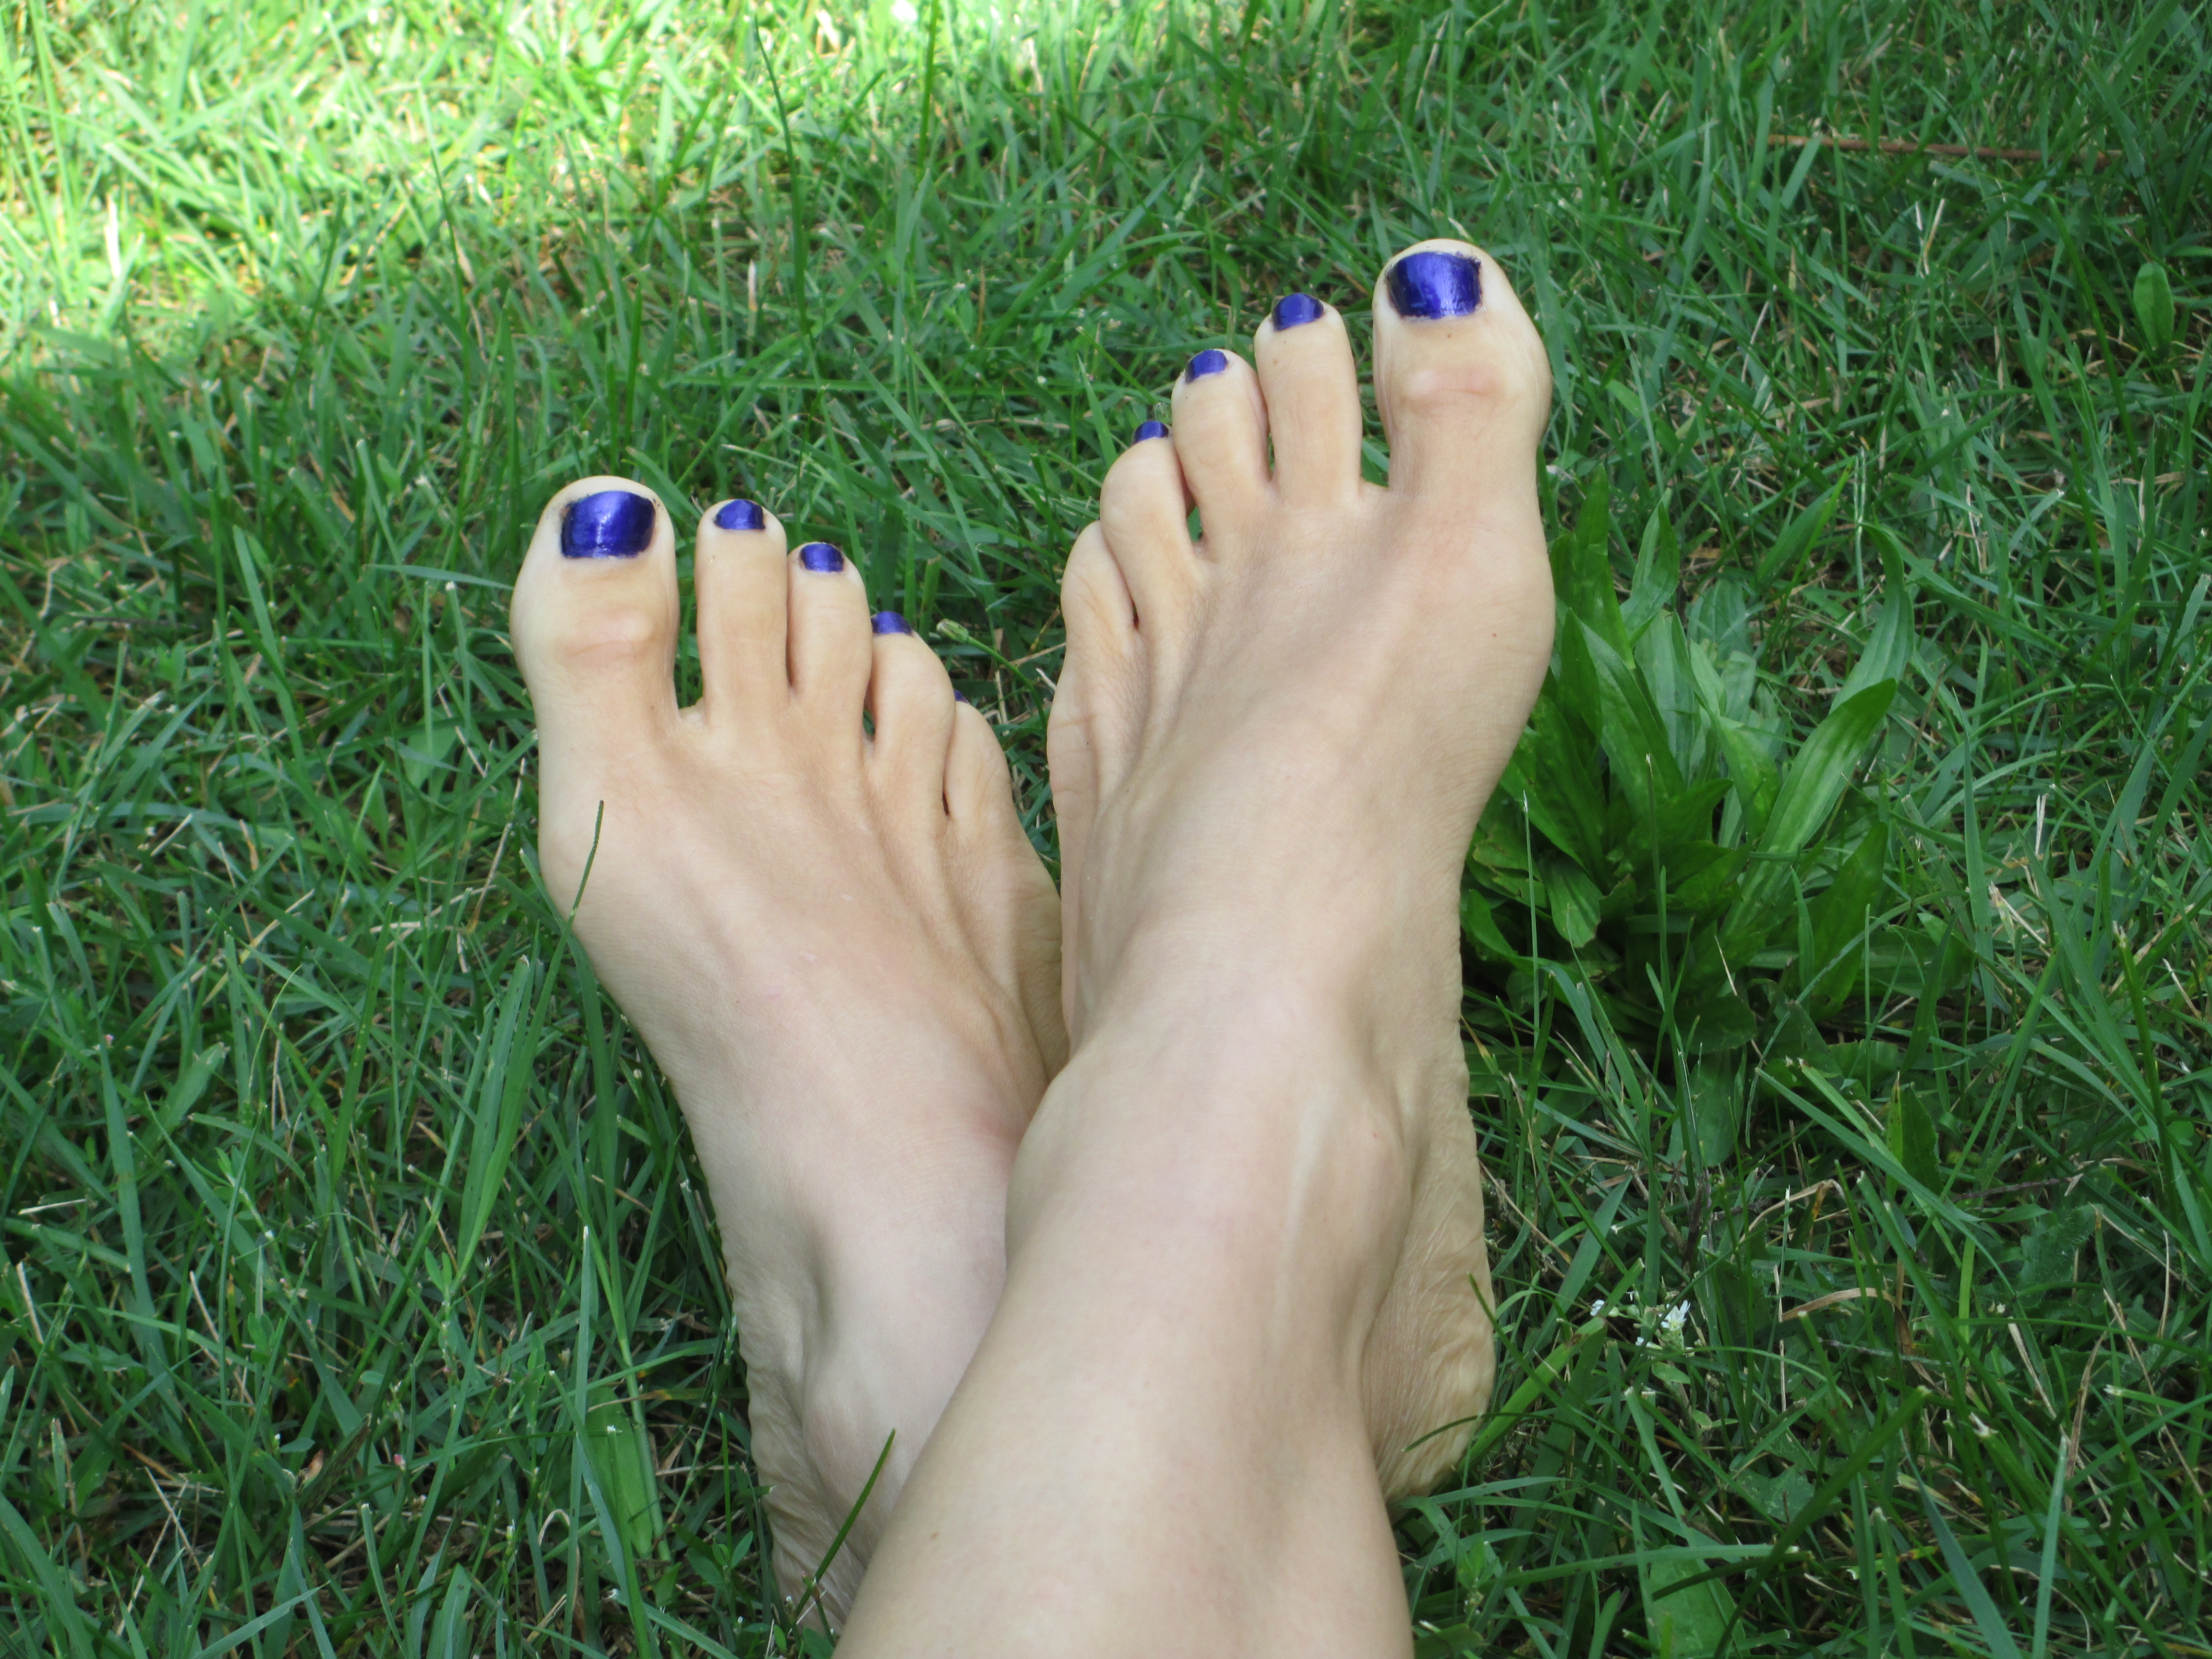 Alicia foot best adult free photos